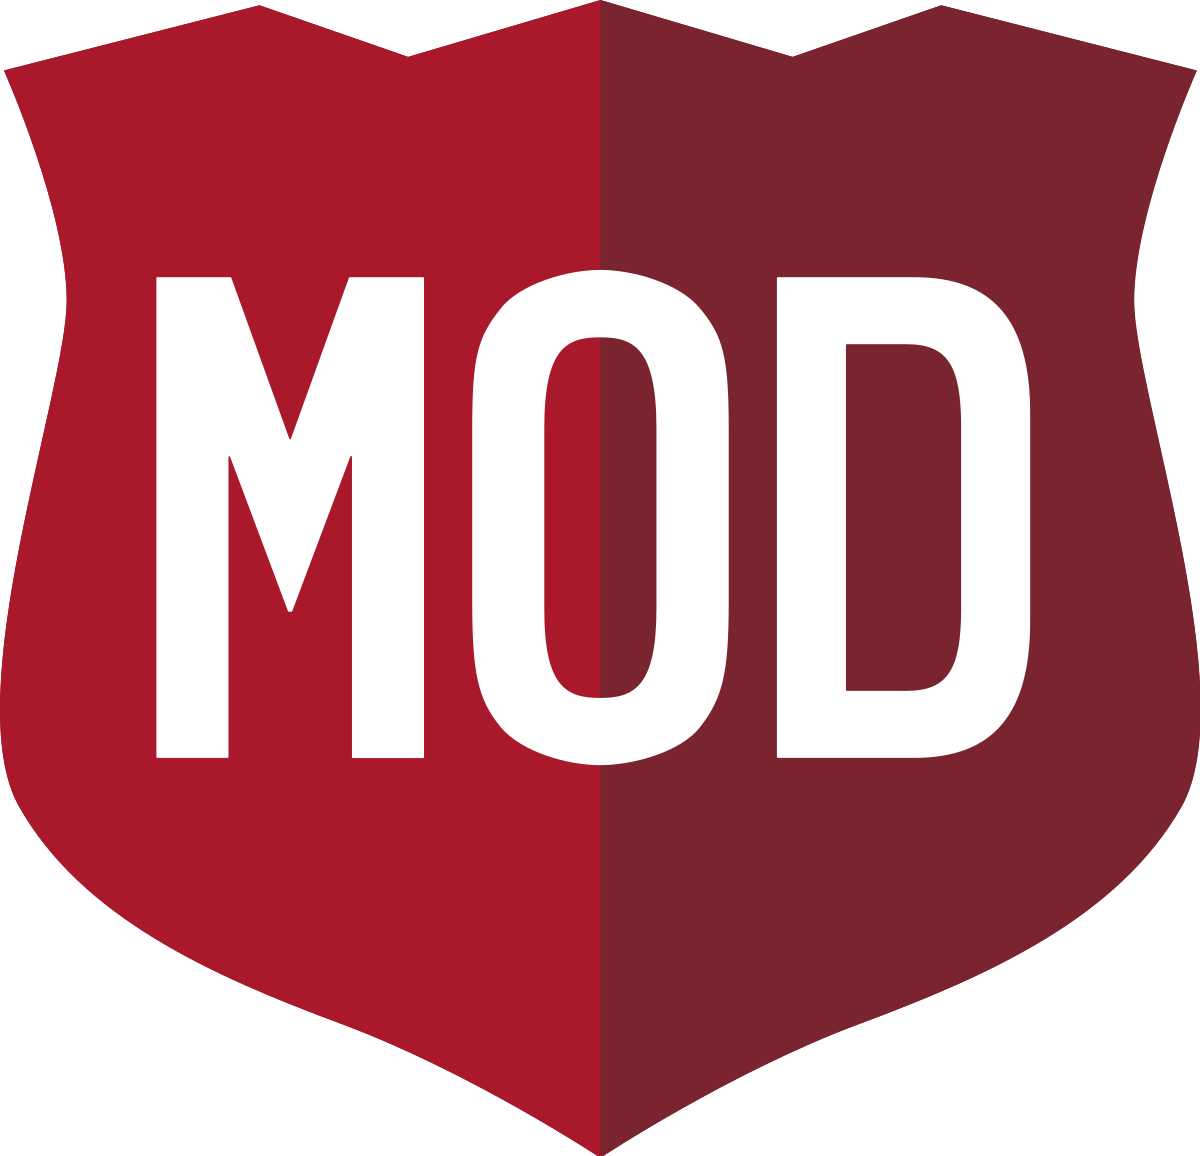 Mod Pizza is a Trendy New Pizzeria You'll Love